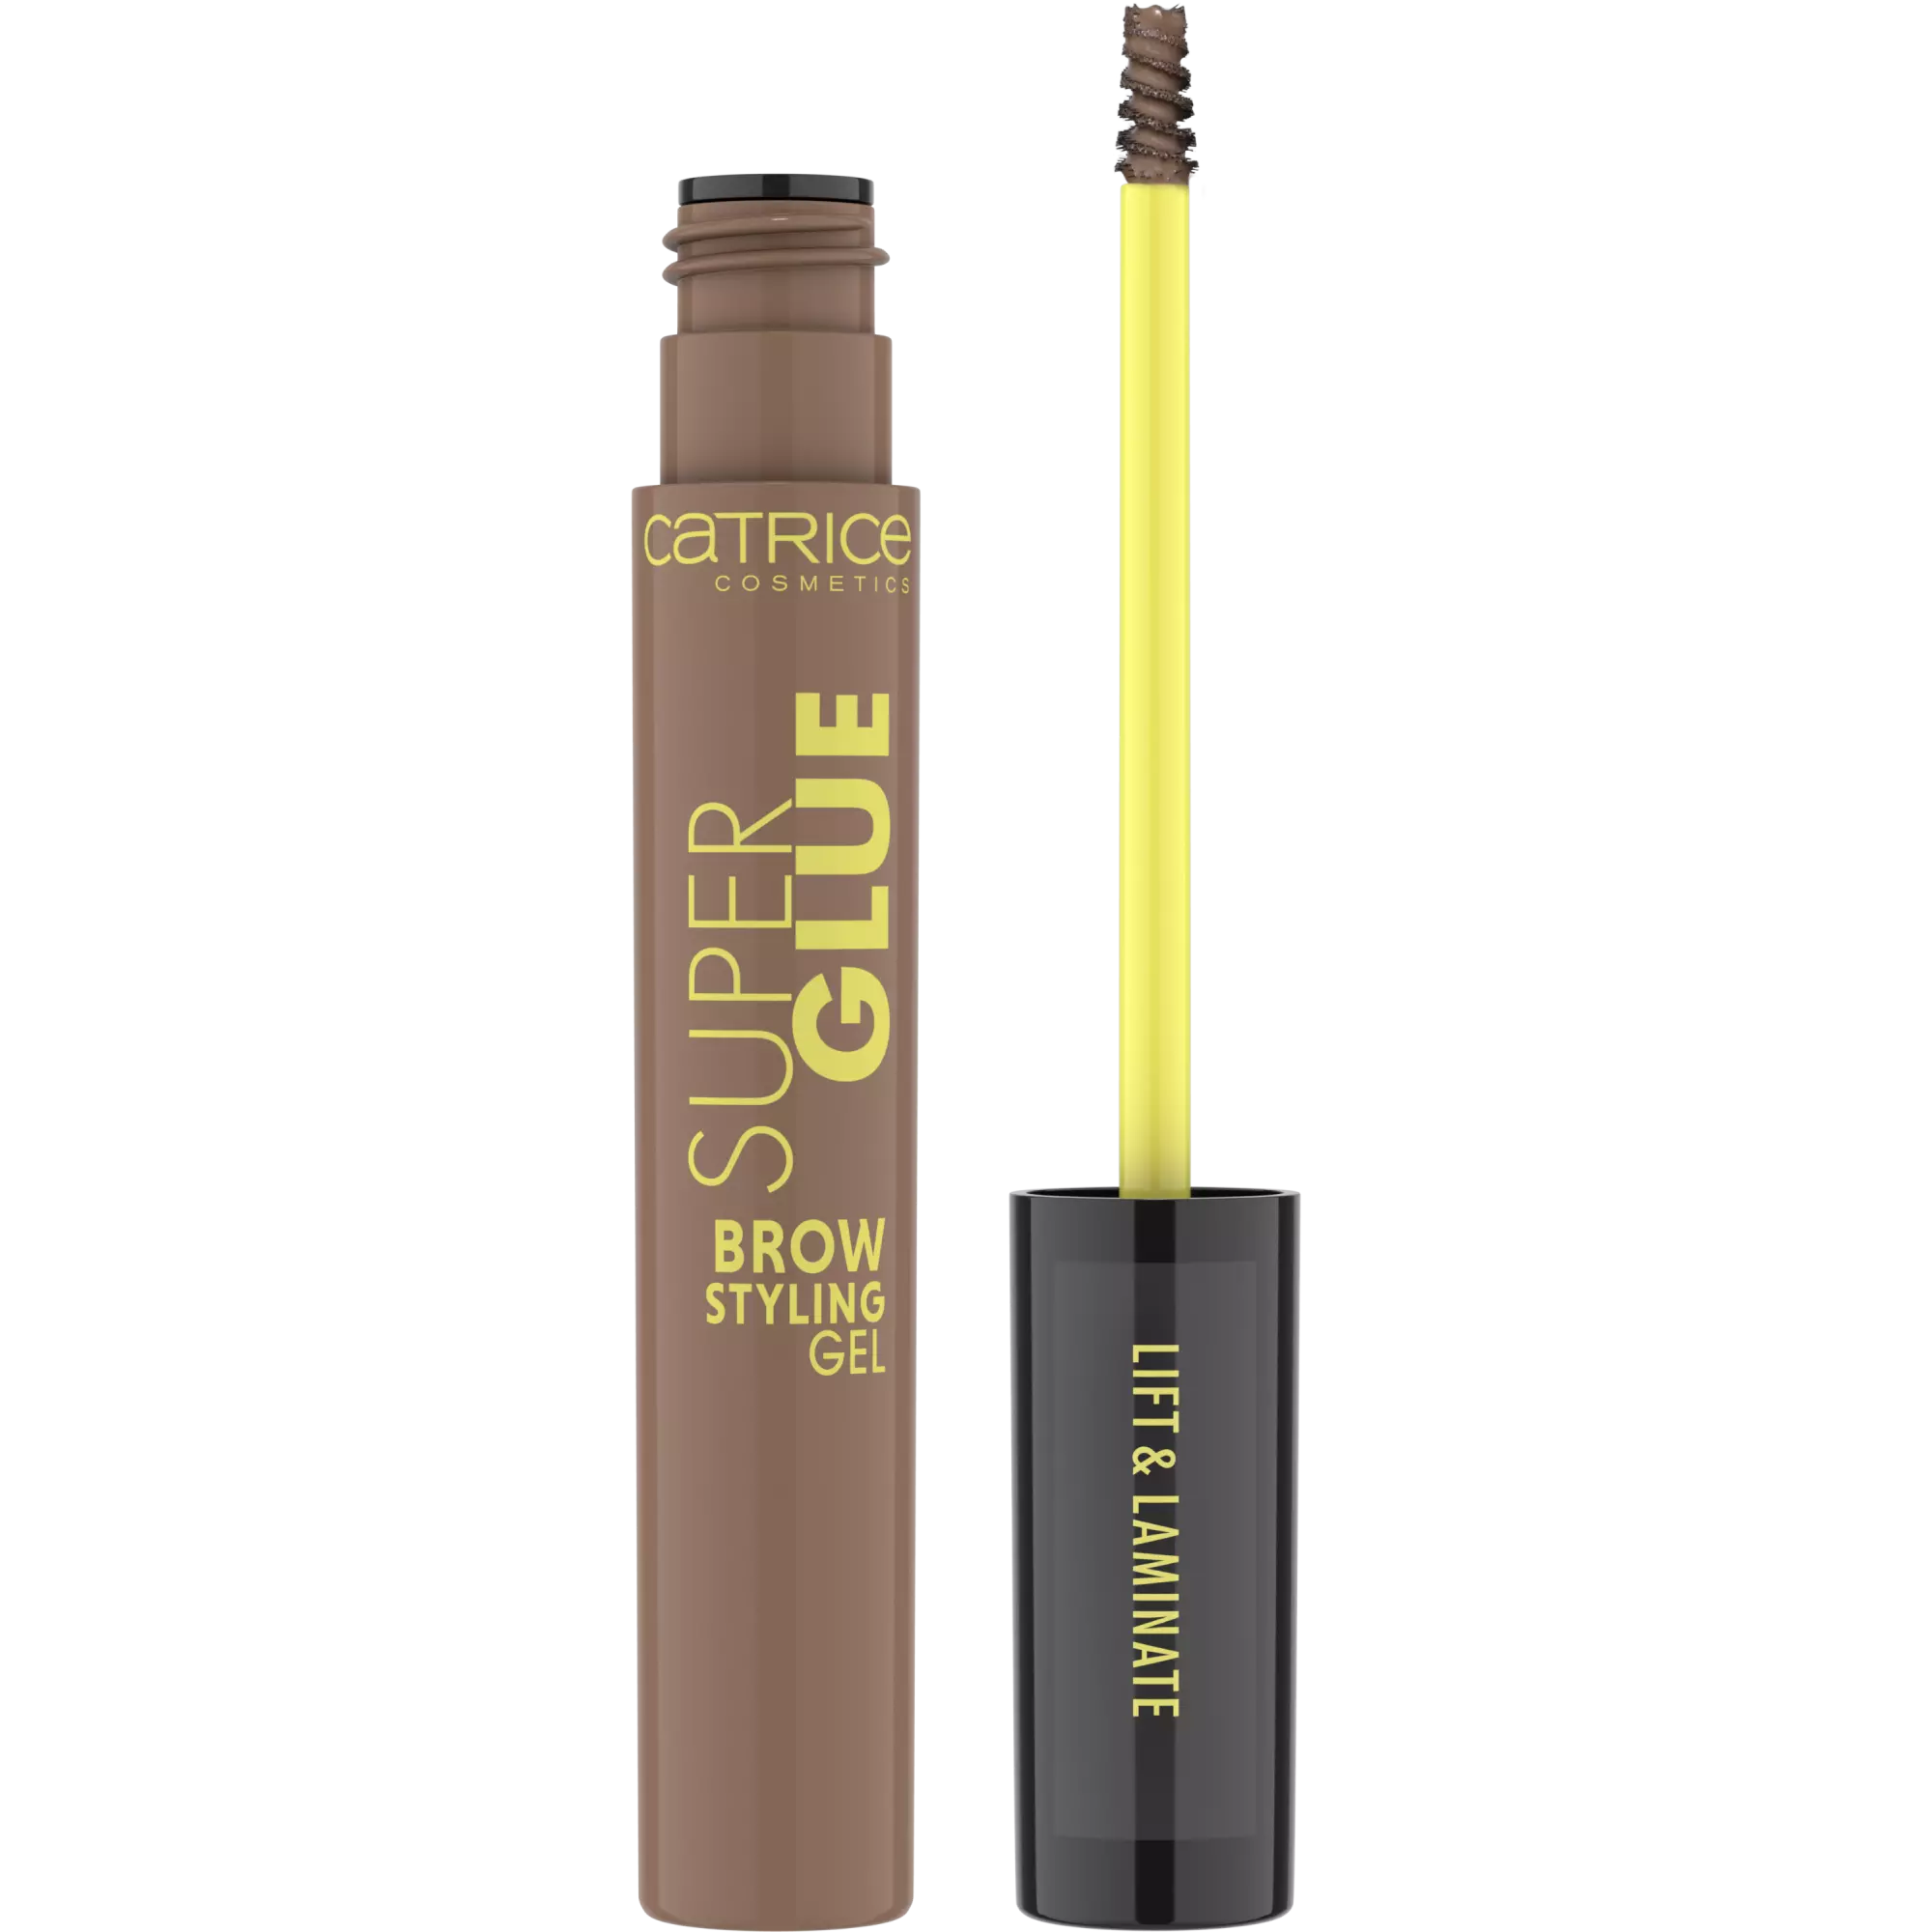 Catrice Super Glue Brow Styling Gel - 020 Light Brown